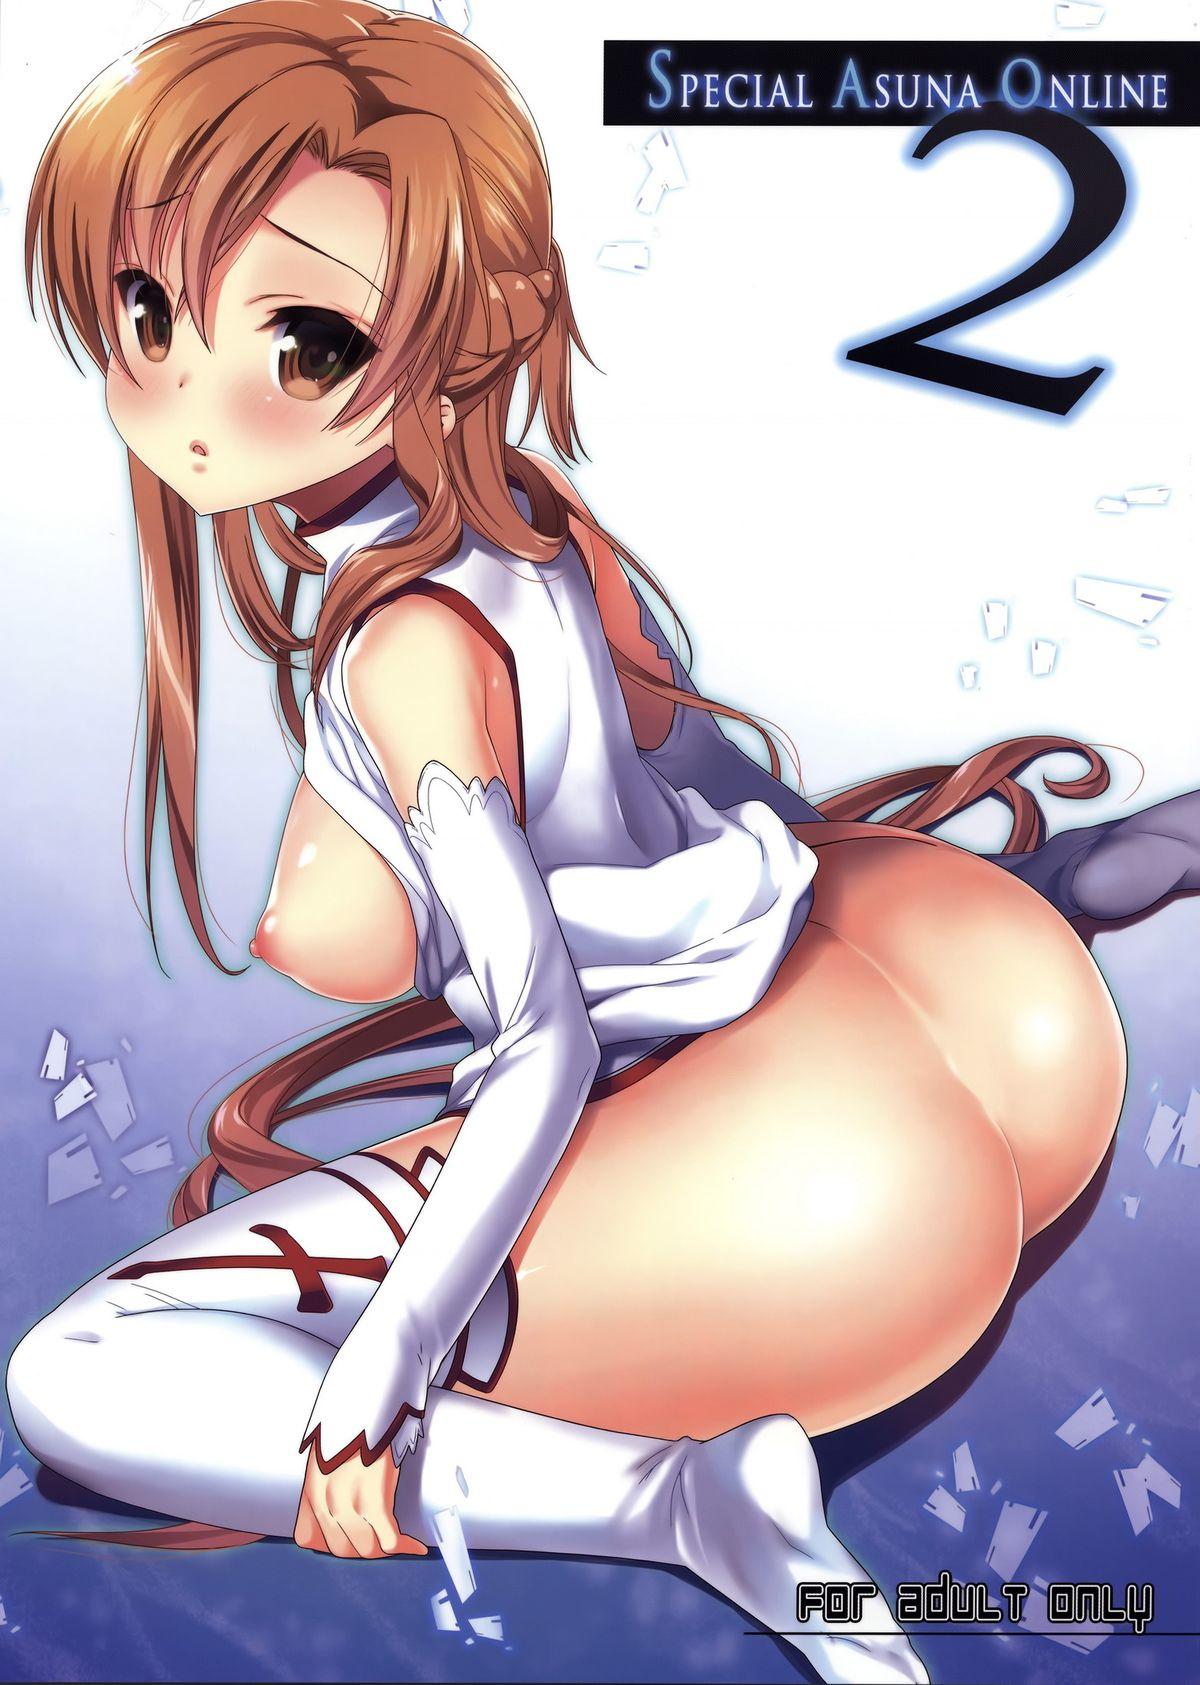 Arabe SPECIAL ASUNA ONLINE 2 - Sword art online Gay Kissing - Page 1